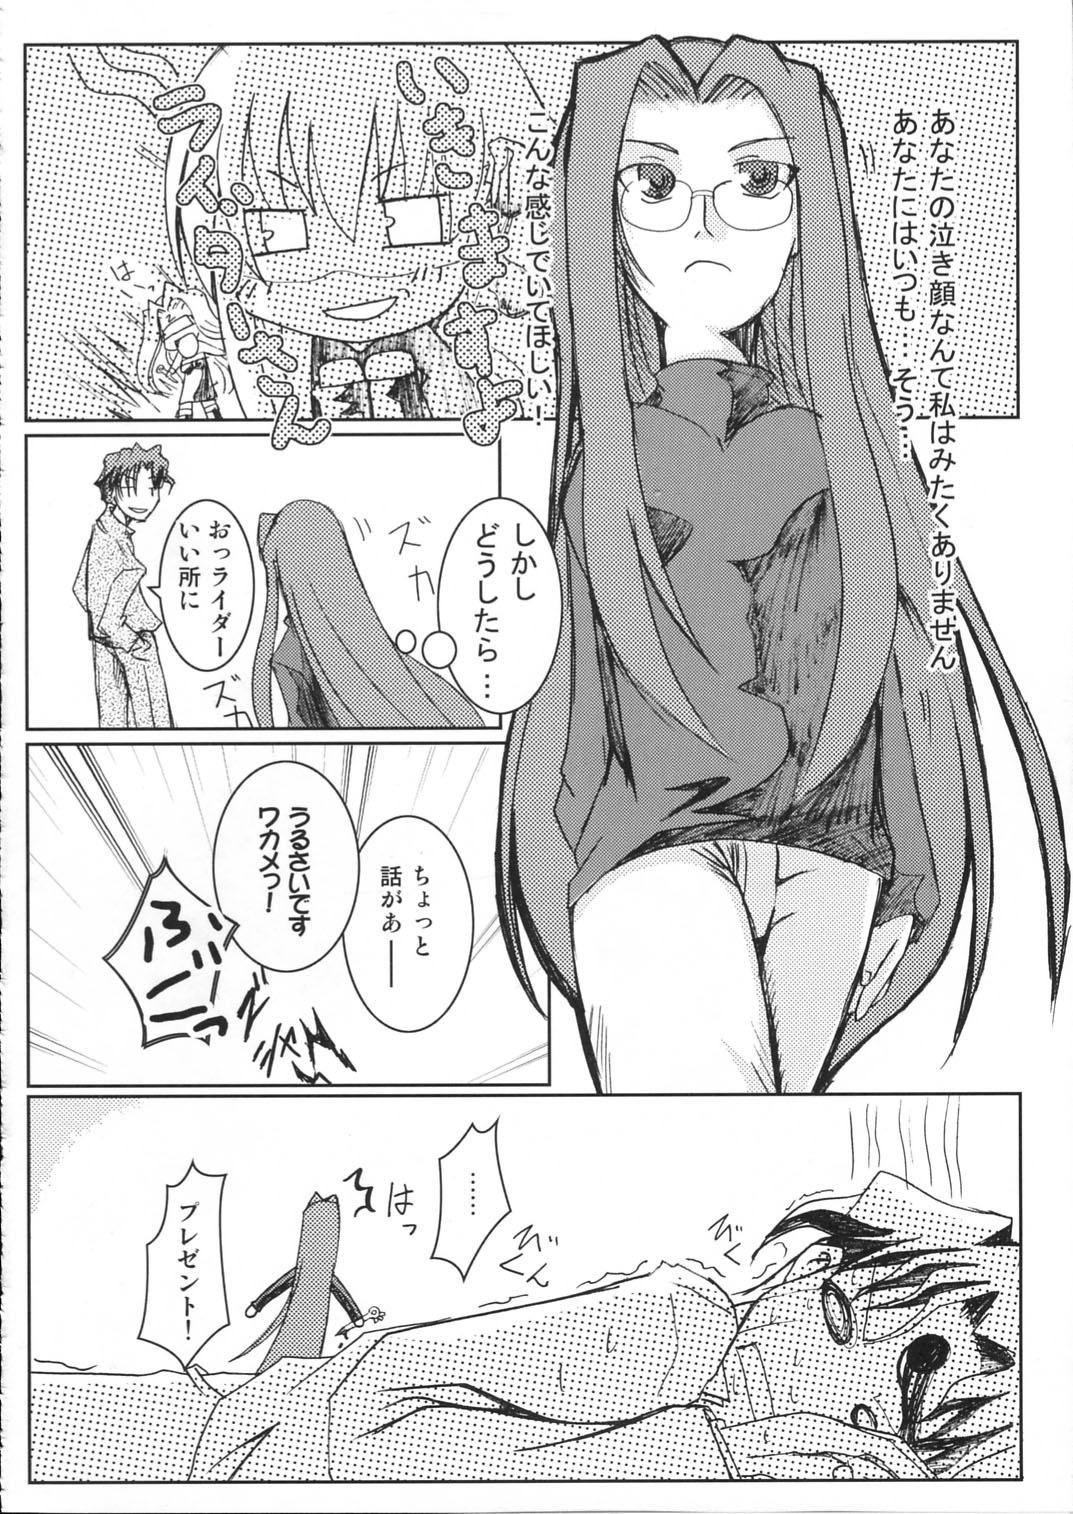 Hot Teen JUDGEMENT - Fate stay night Fate hollow ataraxia Petera - Page 10